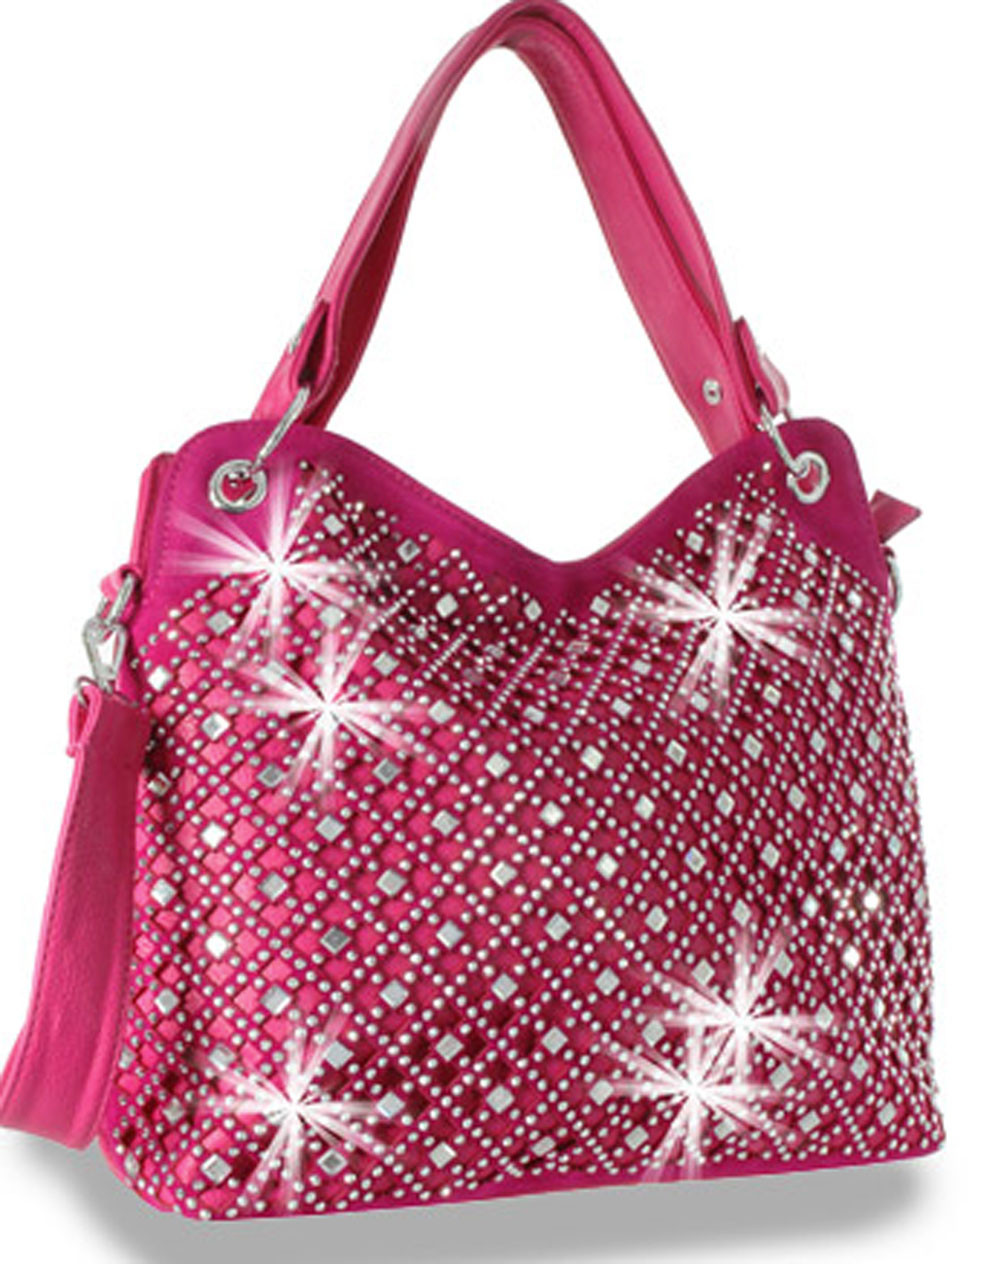 BLING BAGS to Update Your Glamour Accessories • at SequinQueen